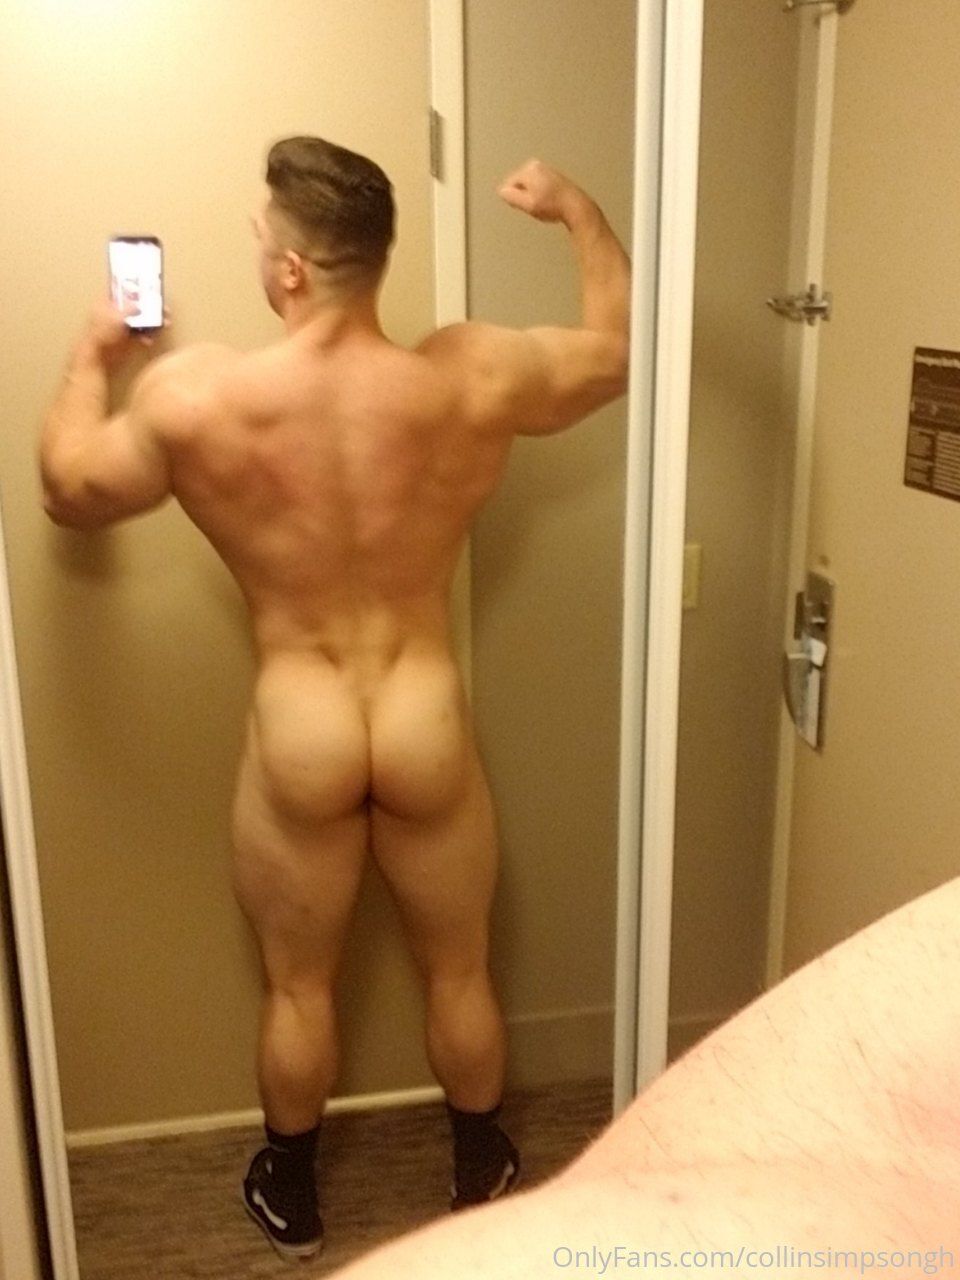 Collin simpson onlyfans